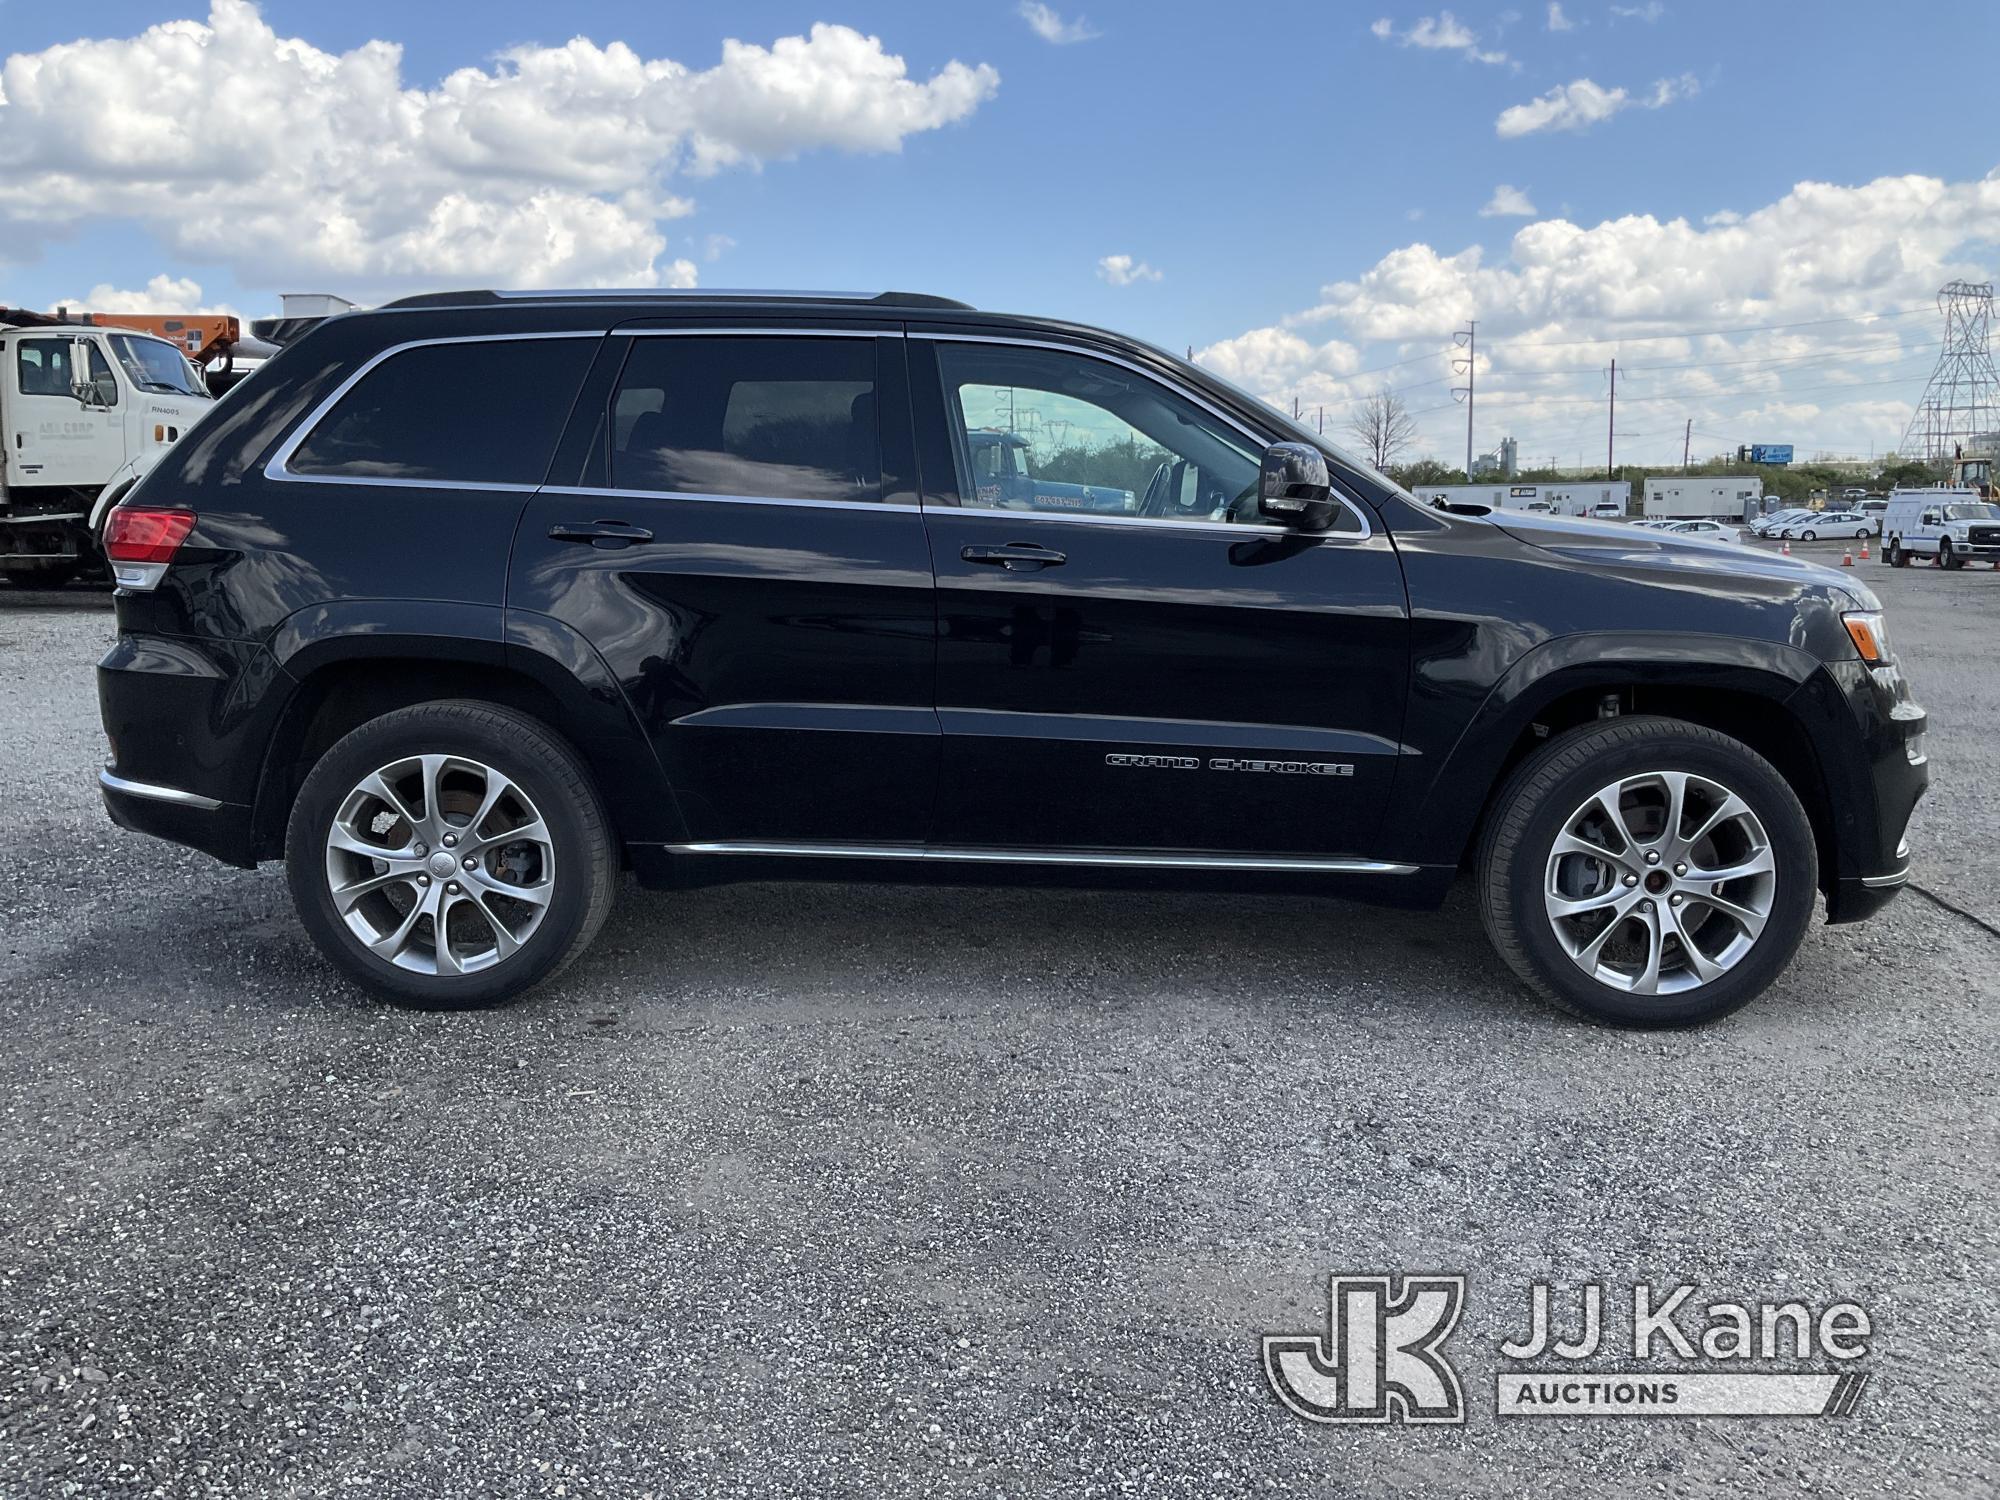 (Plymouth Meeting, PA) 2019 Jeep Grand Cherokee 4x4 4-Door Sport Utility Vehicle Runs & Moves, Body